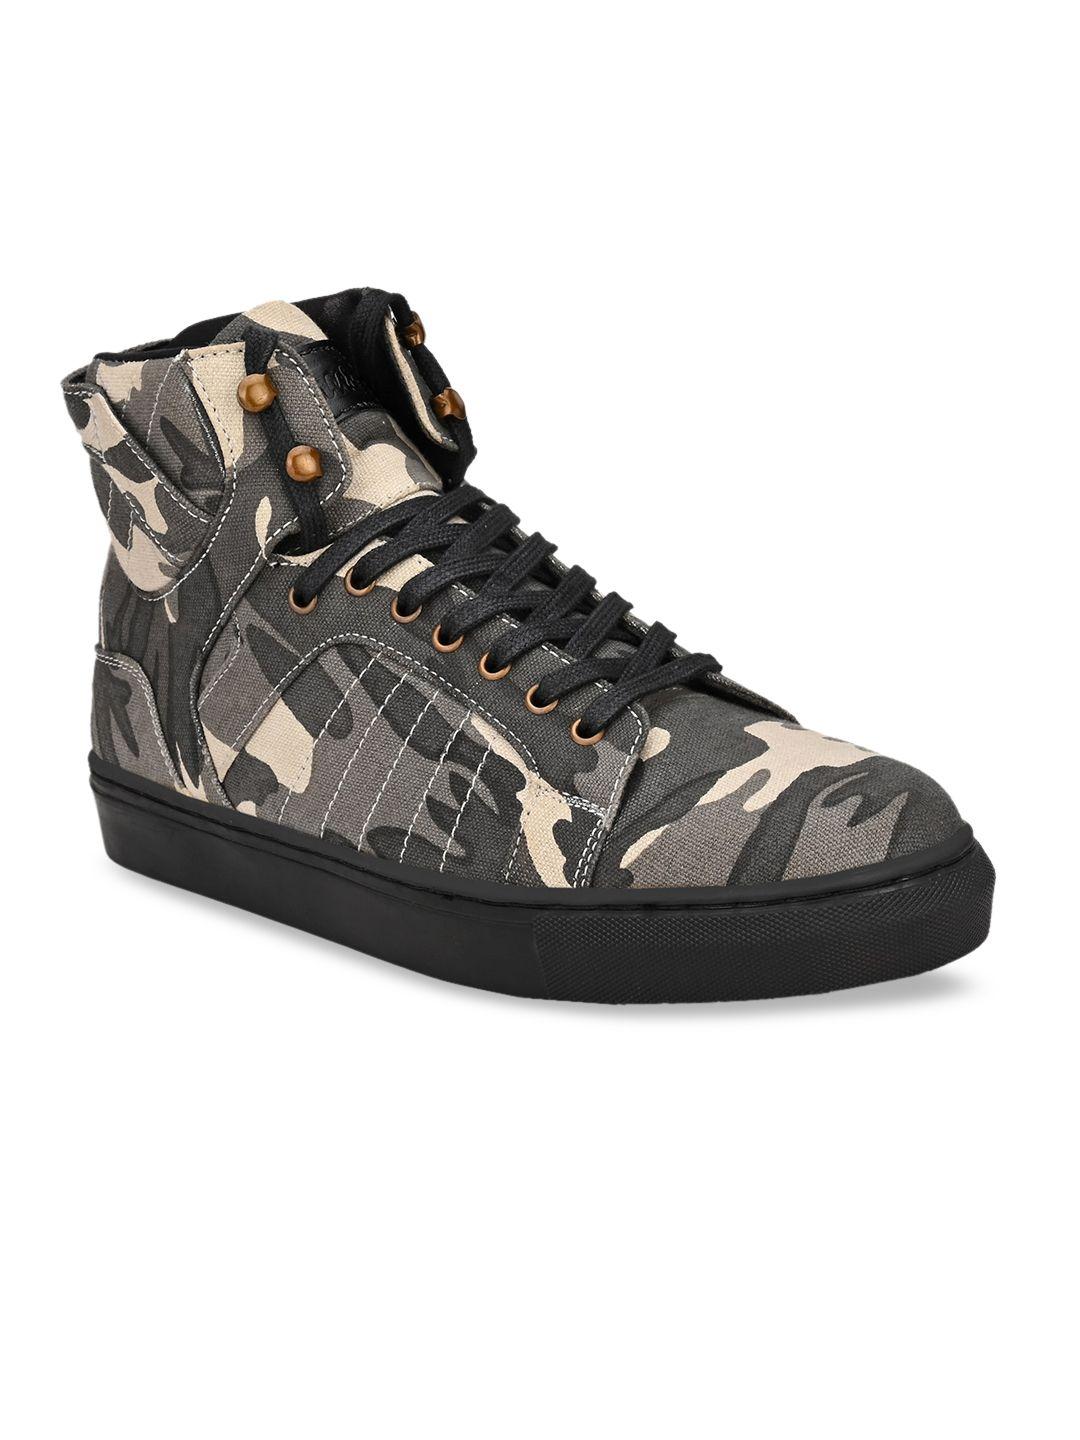 shences men olive green & cream-coloured printed canvas mid-top sneakers